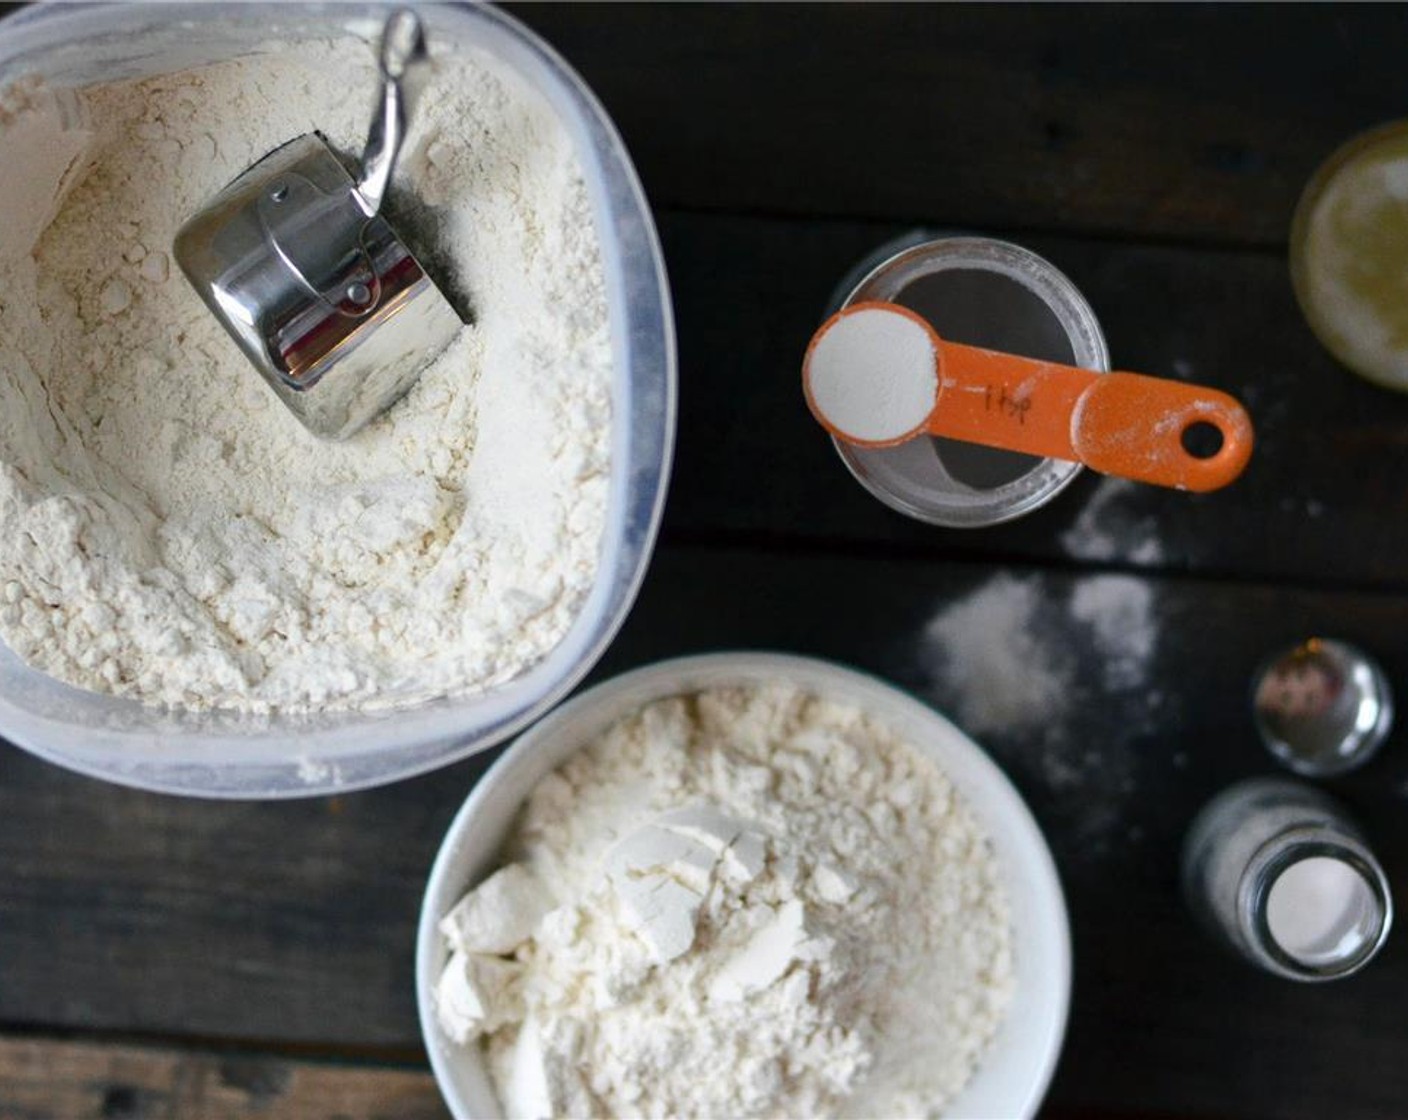 step 2 In a large mixing bowl, combine the dry ingredients: All-Purpose Flour (3 cups), Baking Powder (1 tsp), and Salt (1/2 tsp). Whisk to combine.